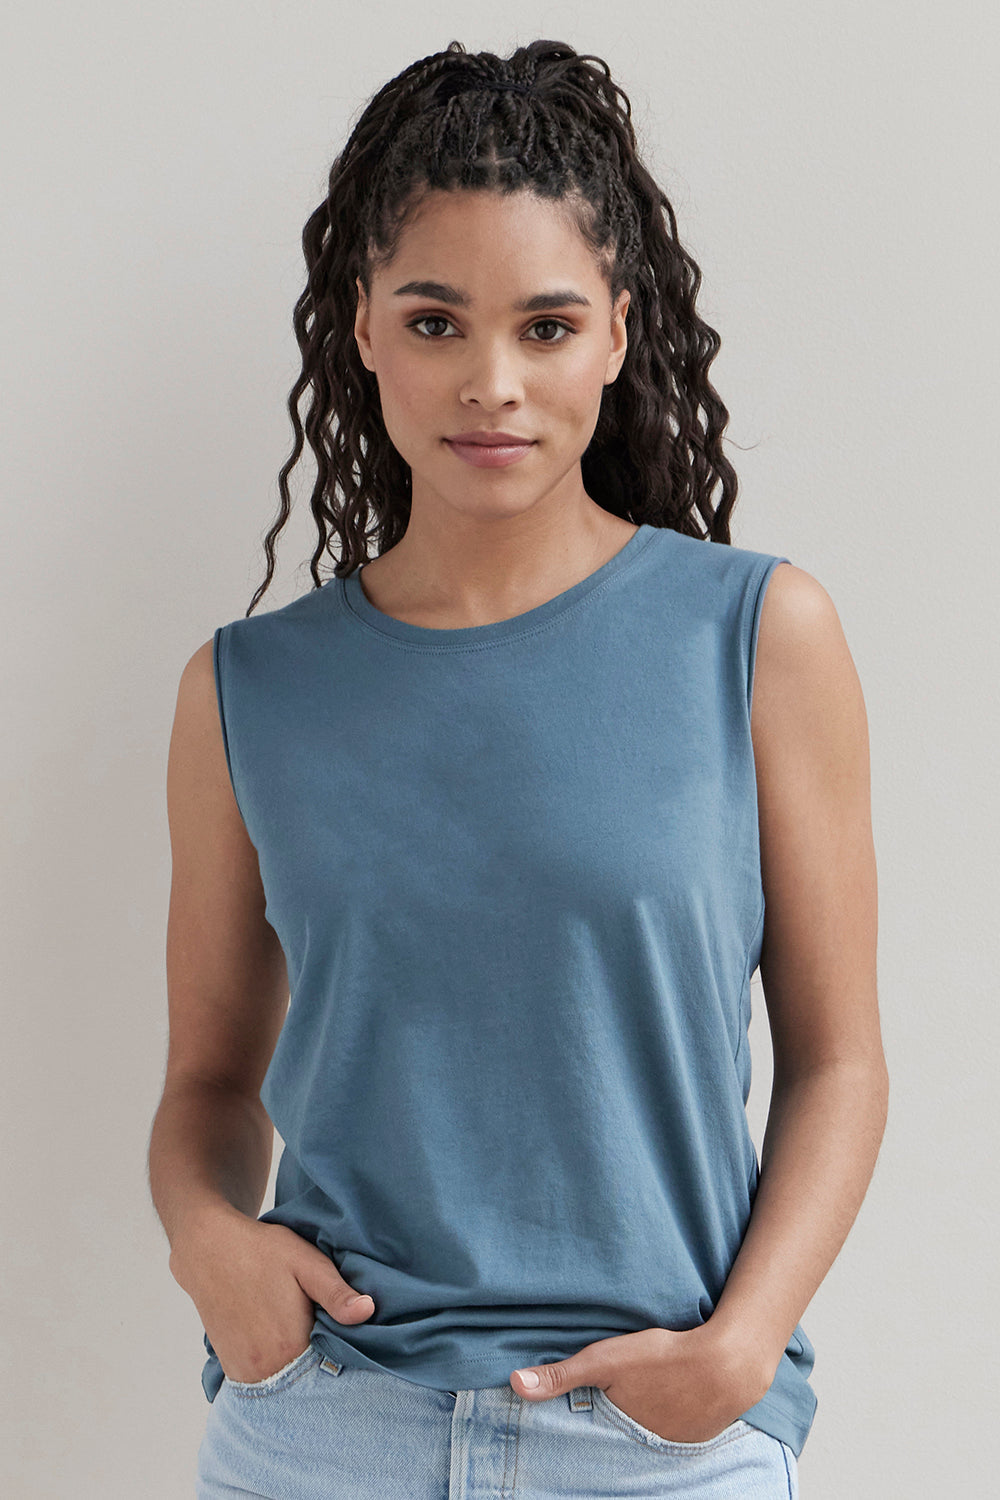 Women's 100% Organic Cotton Sleeveless Tee (Discontinued Color)